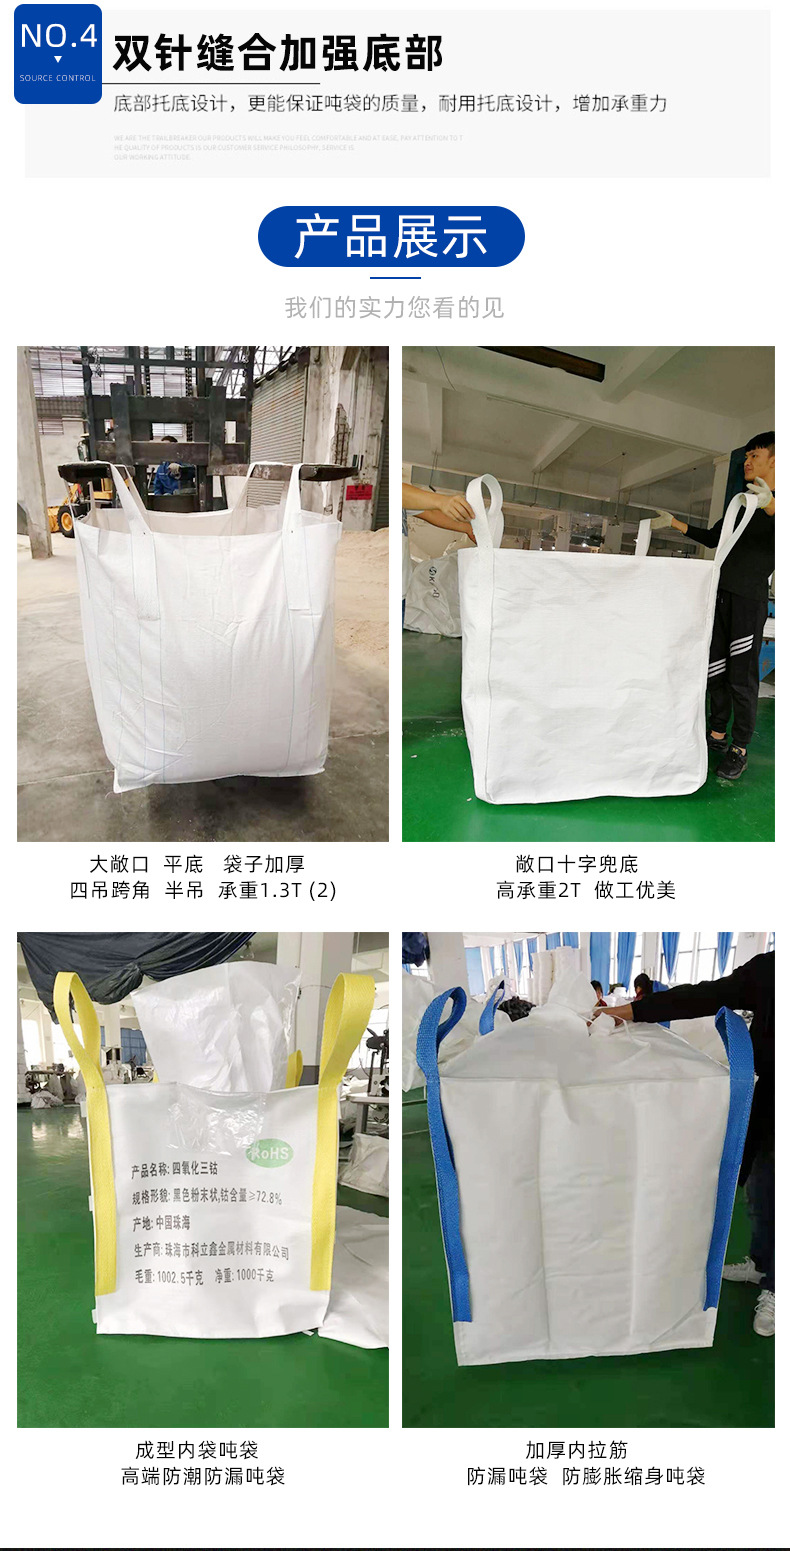 Chenghui Ton Bag Factory Address Reinforcement and Thickening of Plastic Ton Bag Pallets with Small Orifices for Upper and Lower Container Bags with Strong Bearing Capacity